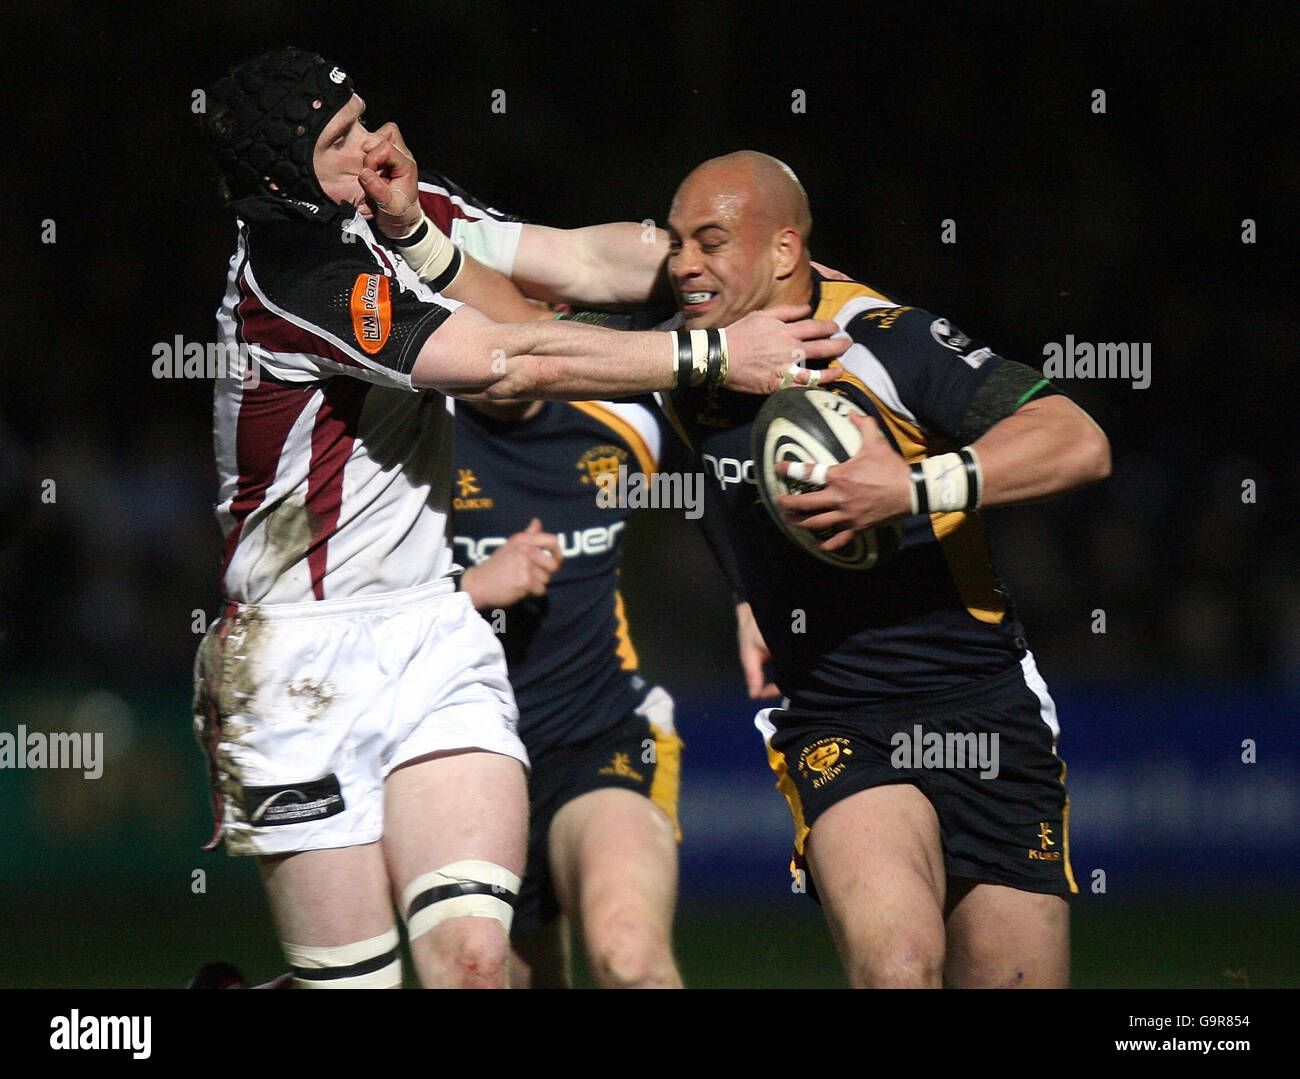 Rugby Union - Guinness Premiership - Worcester Warriors v Newcastle Falcons - Sixways Stadium. Worcester's Dale Rasmussen hands off Newcastle's Jason Oakes during the Guinness Premiership match at Sixways Stadium, Worcester. Stock Photo